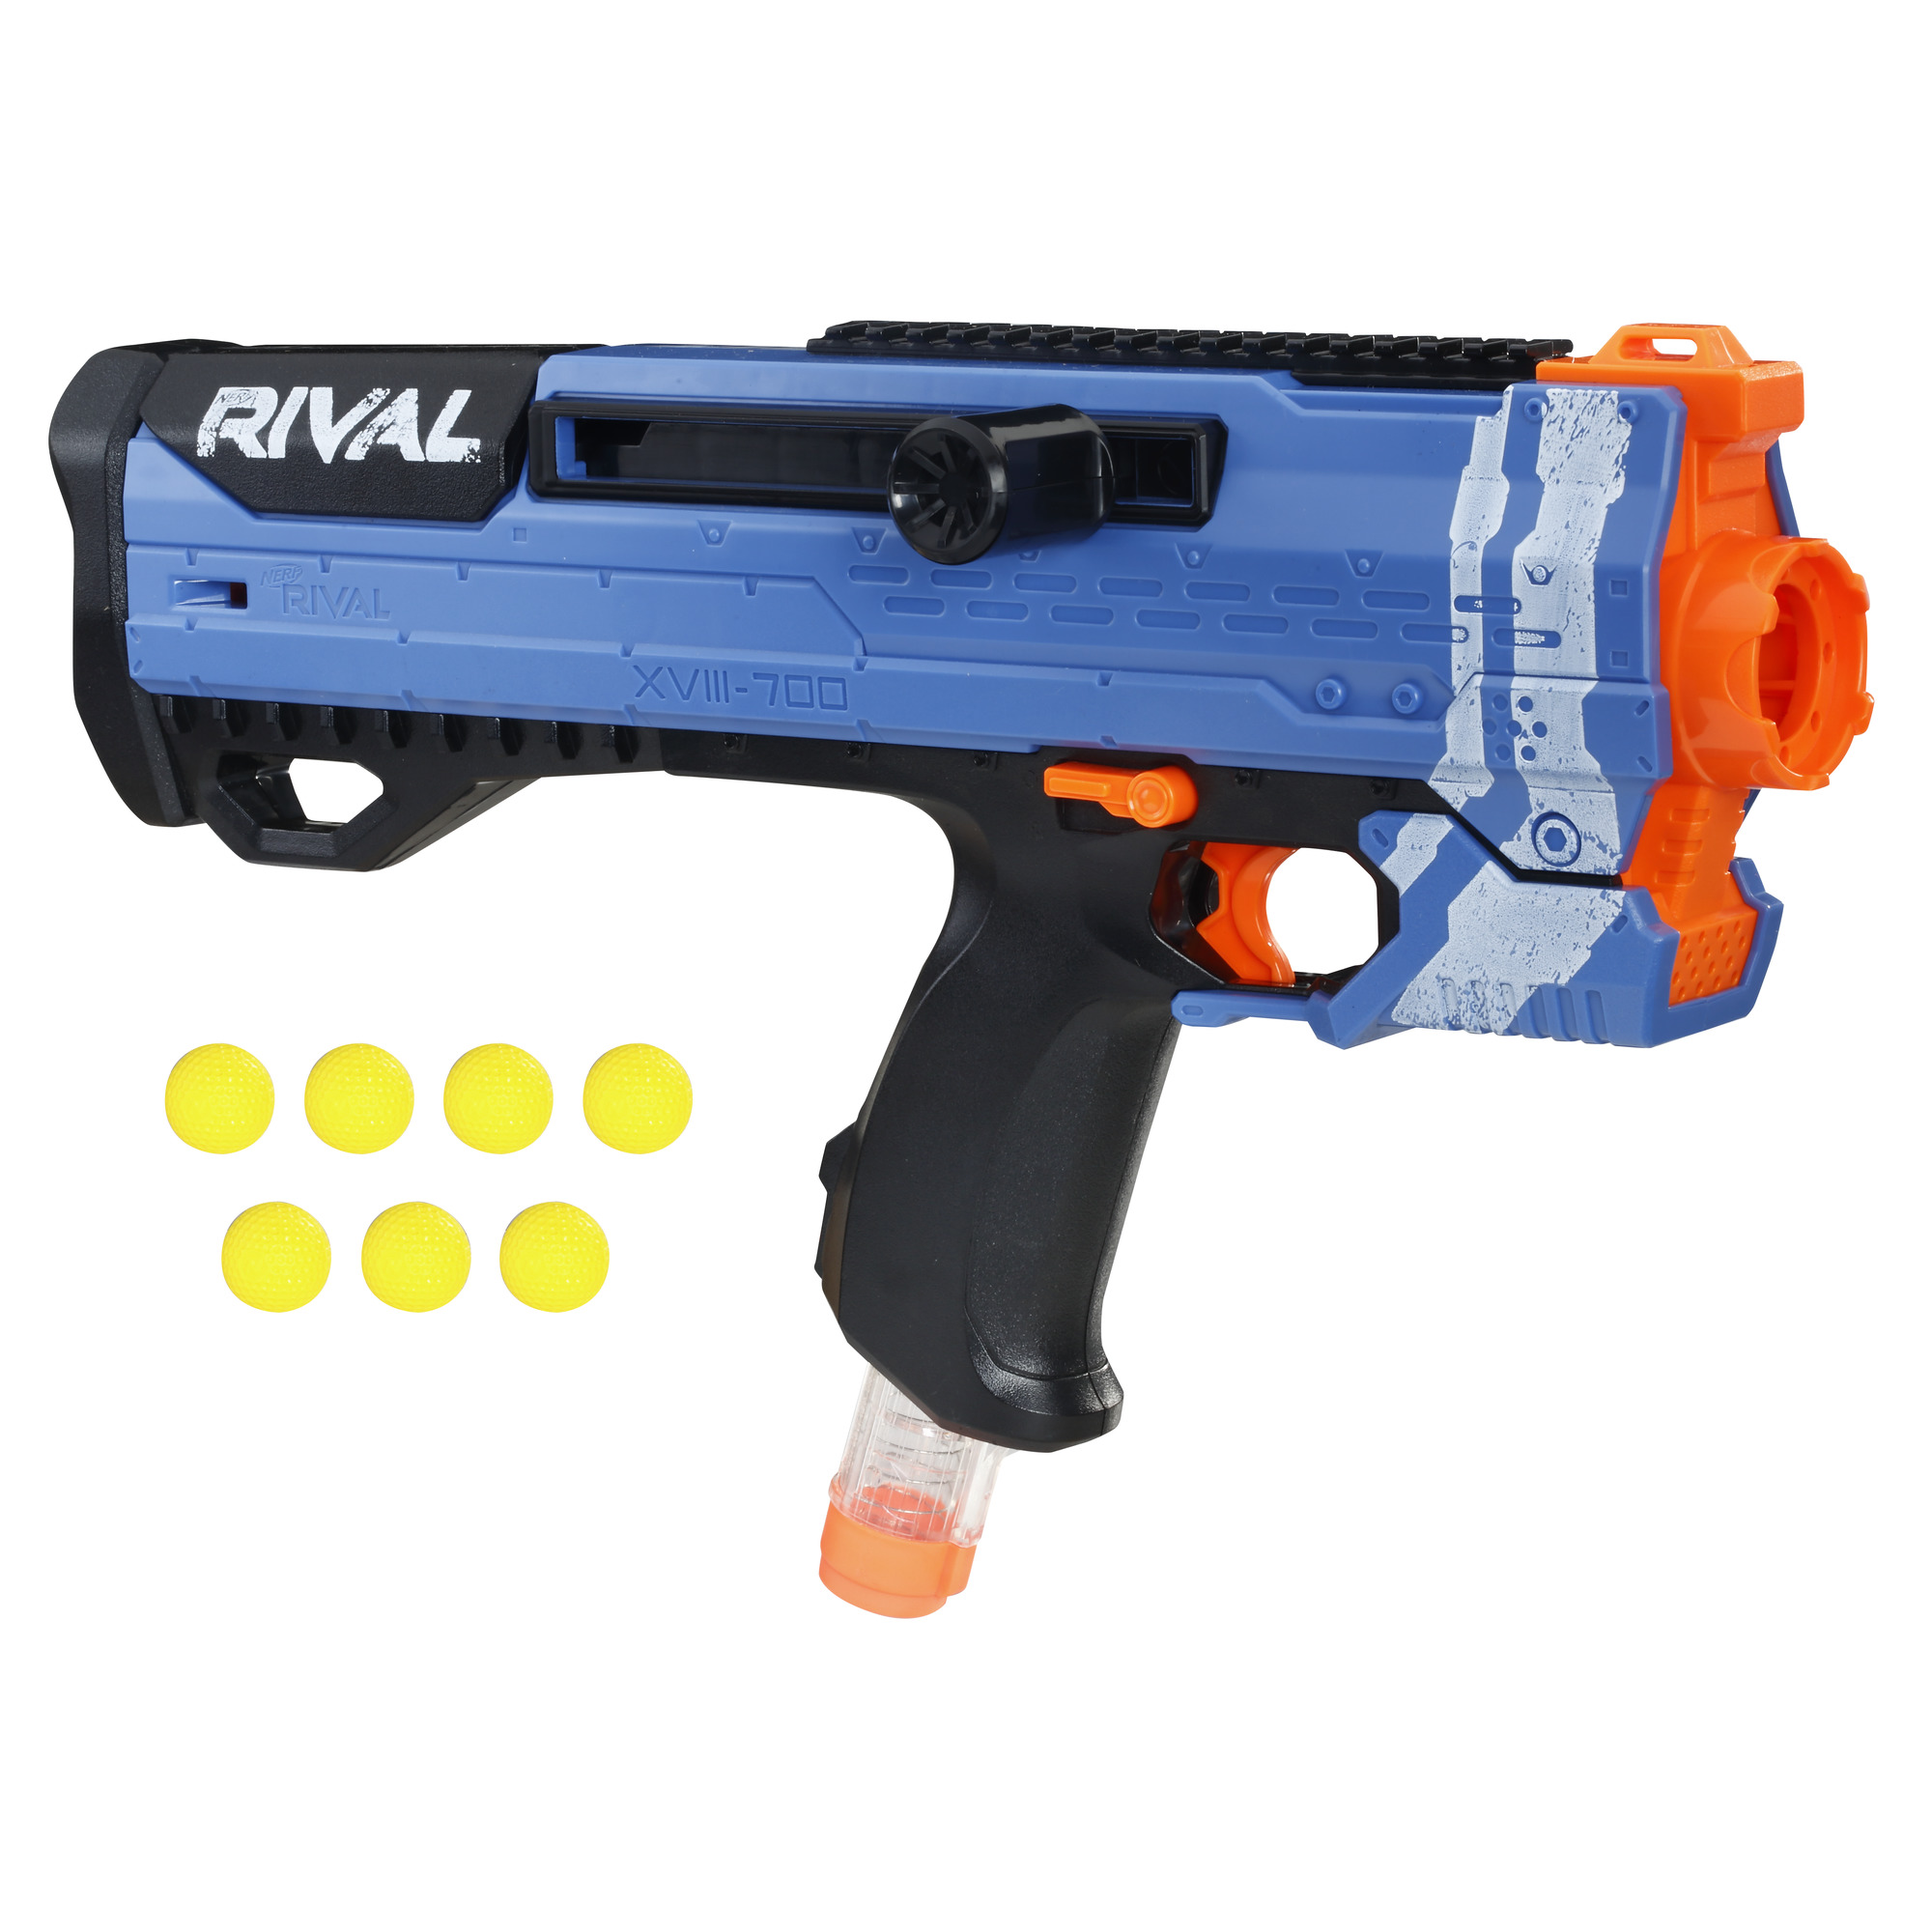 Helios XVIII-700 Nerf Rival Blaster (Blue) -- Bolt-Action, 7 Official Nerf Rival Rounds, 7-Round Magazine - image 1 of 8